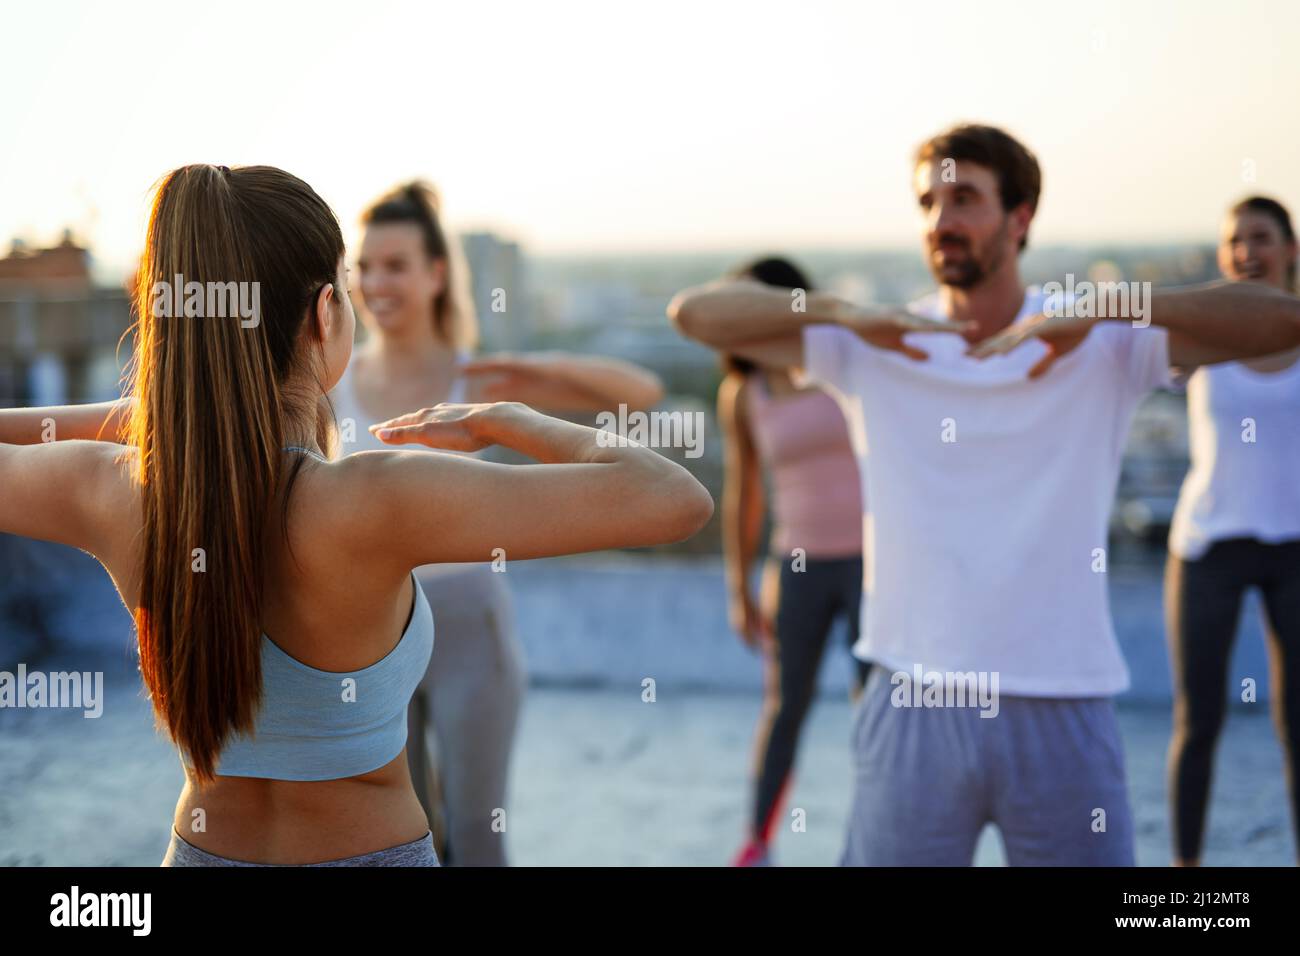 Group of happy fit friends exercising together outdoors. Sport people healthy lifestyle concept Stock Photo